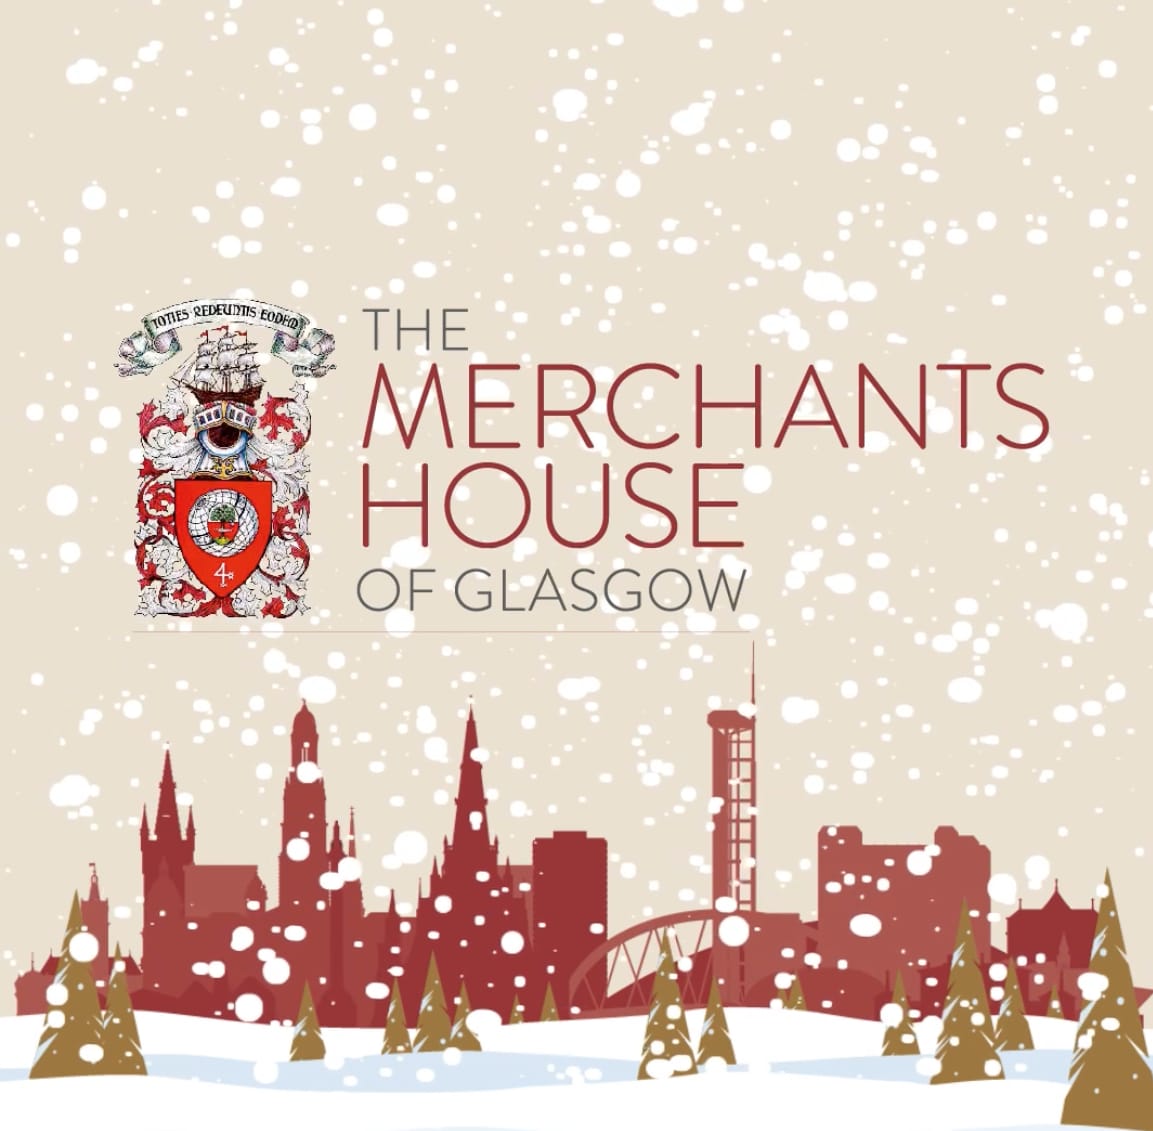 Season’s Greetings from The Merchants House of Glasgow